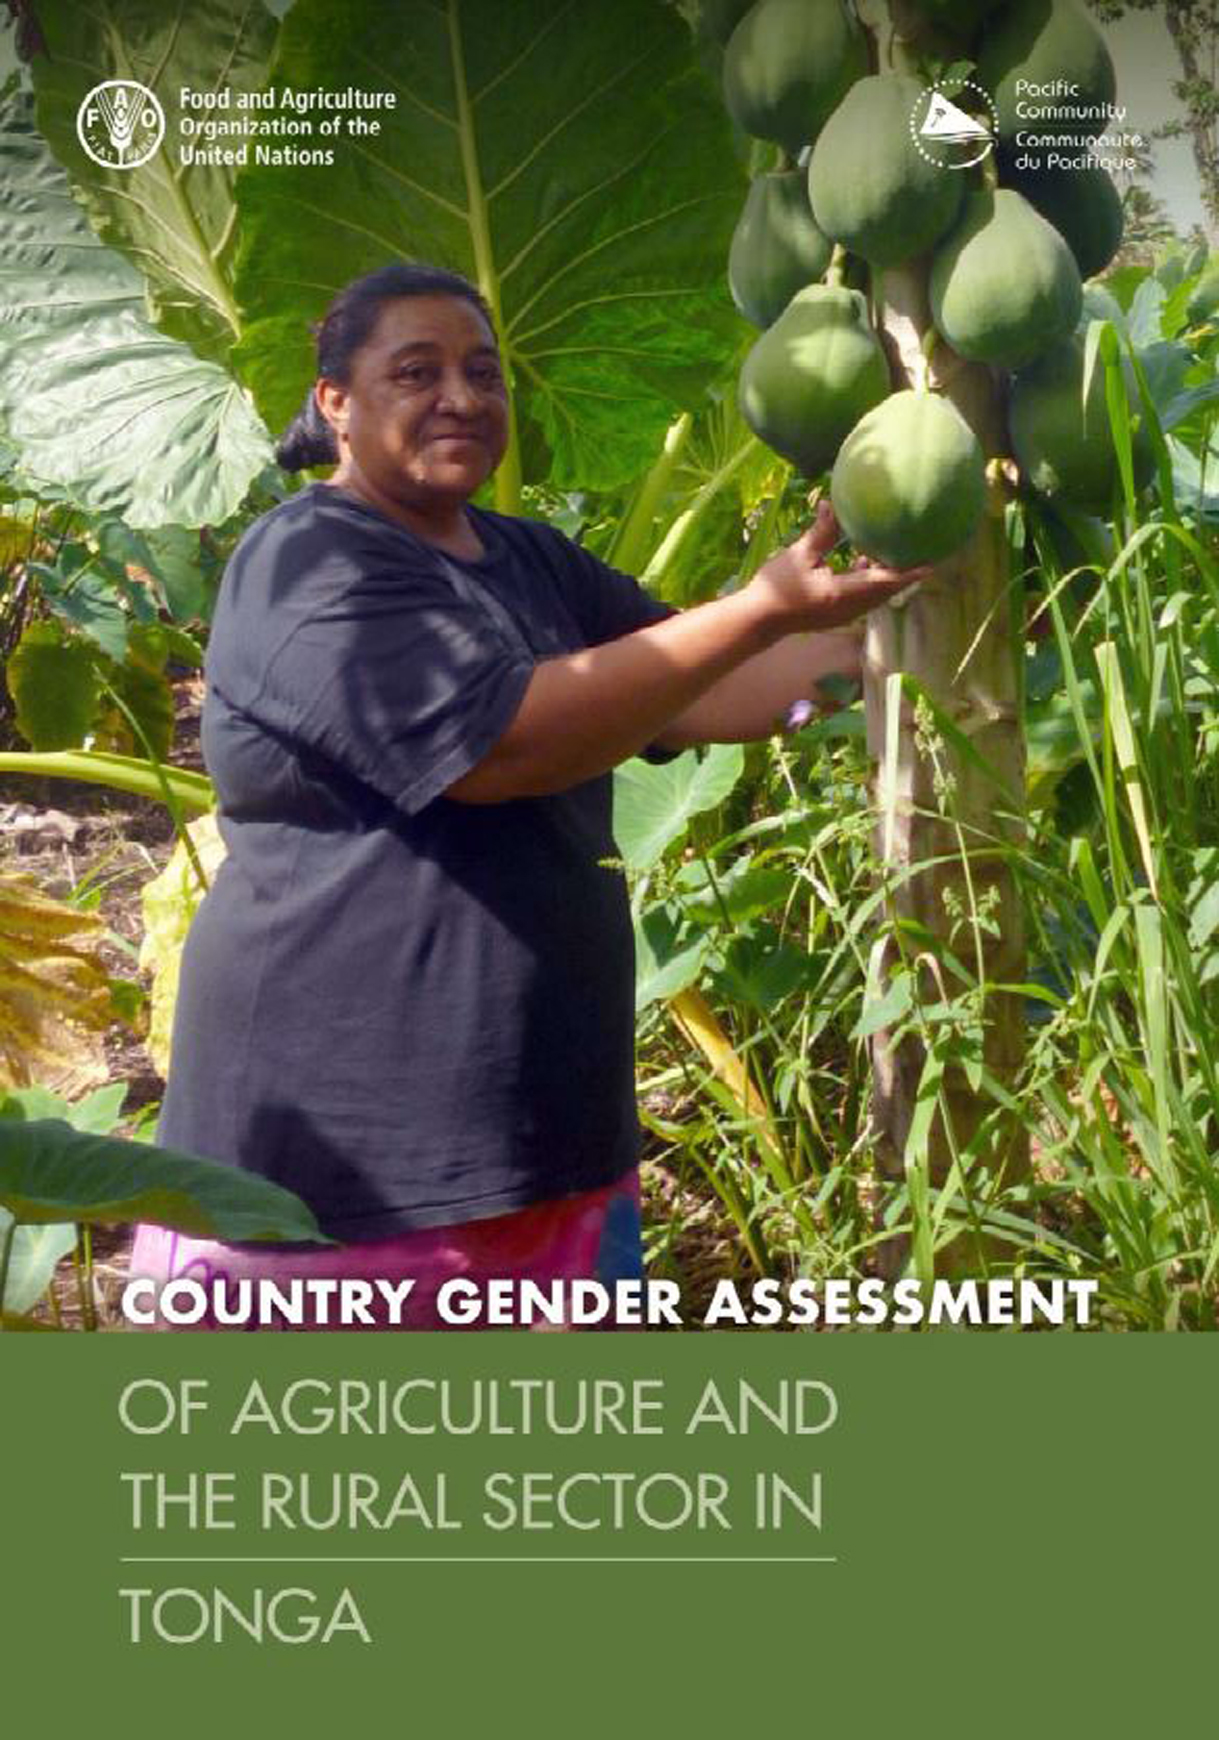 Country Gender Assessment of Agriculture and the rural sector in Tonga